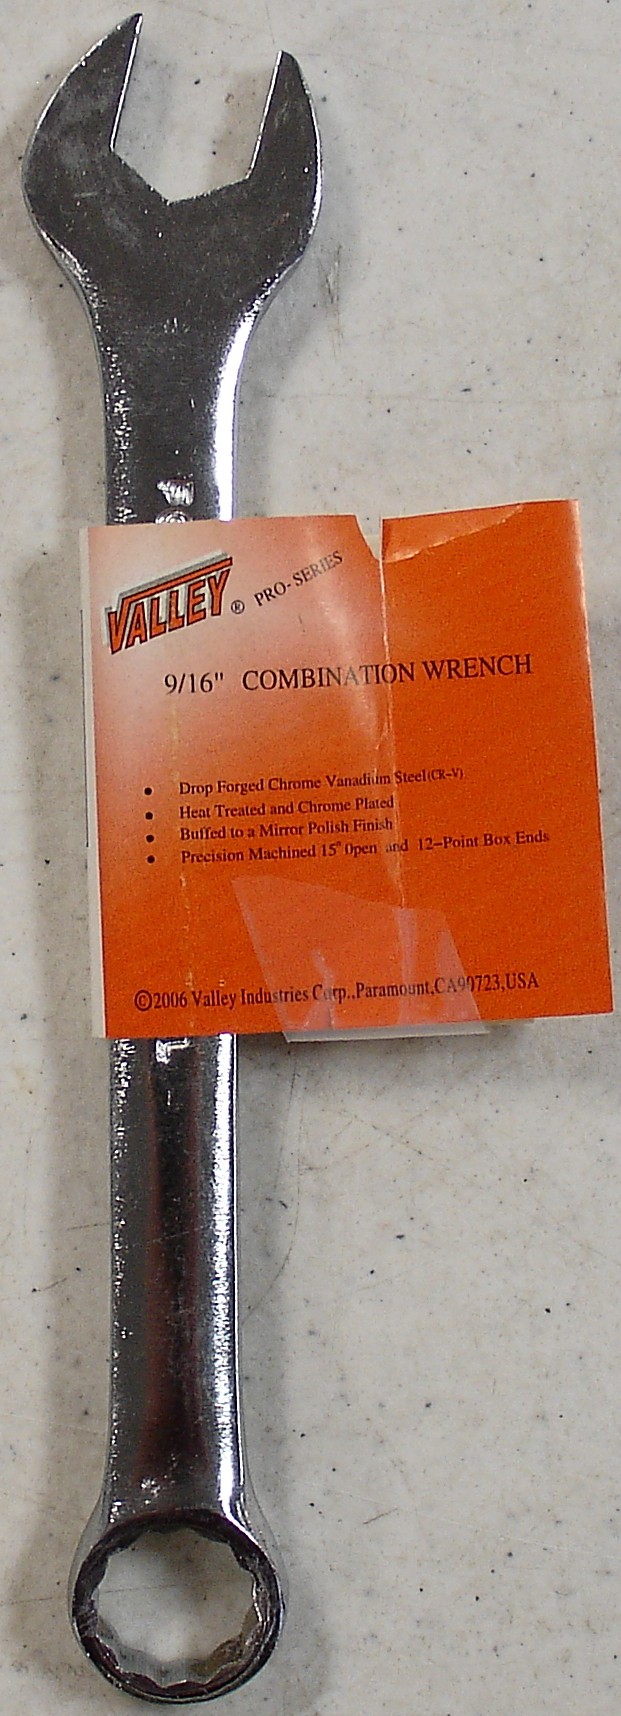 9/16 Combination WRENCH